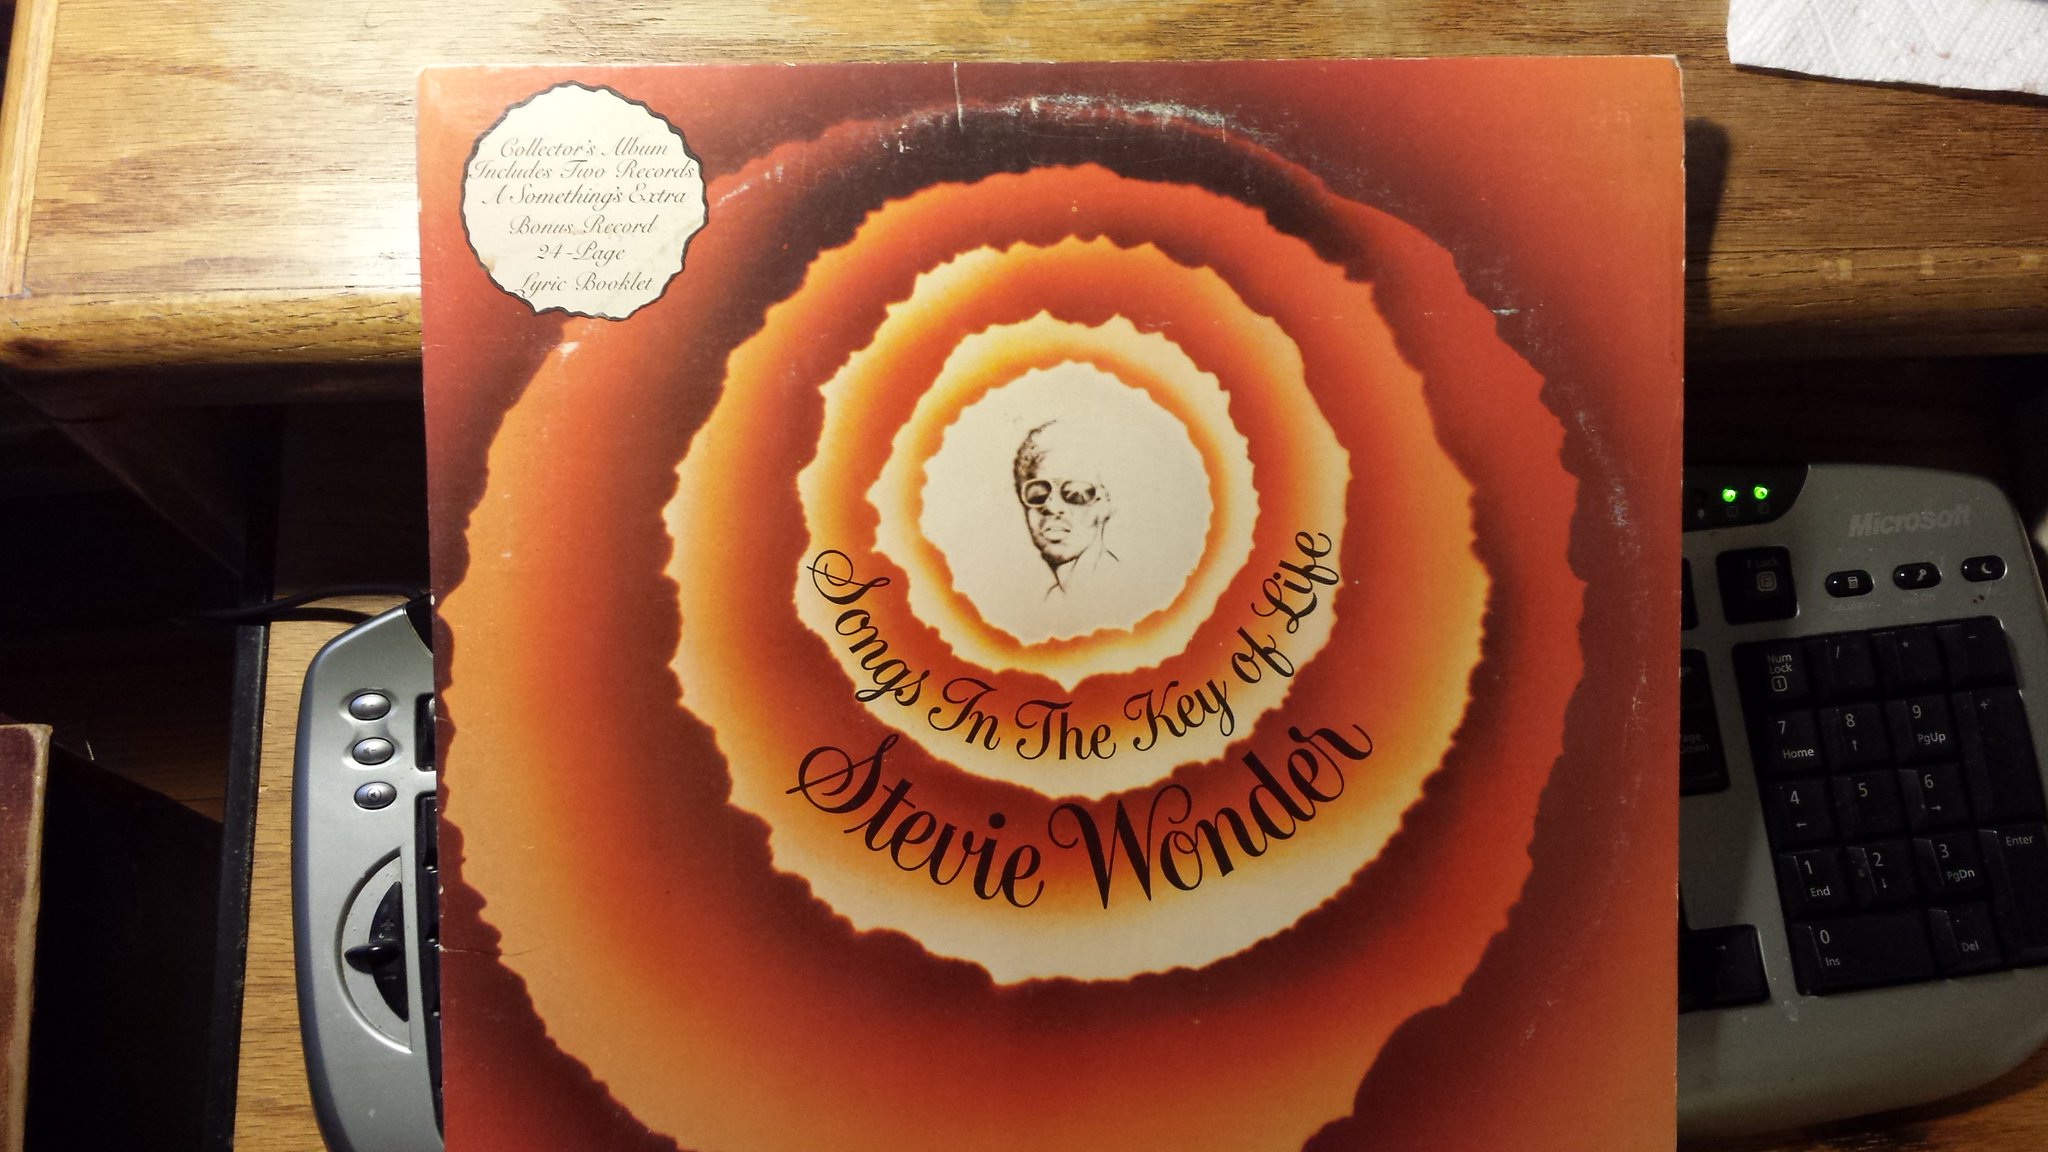 Happy Birthday, Stevie Wonder! One of the best albums ever, Songs In The Key Of Life. Wore this LP out in college. 